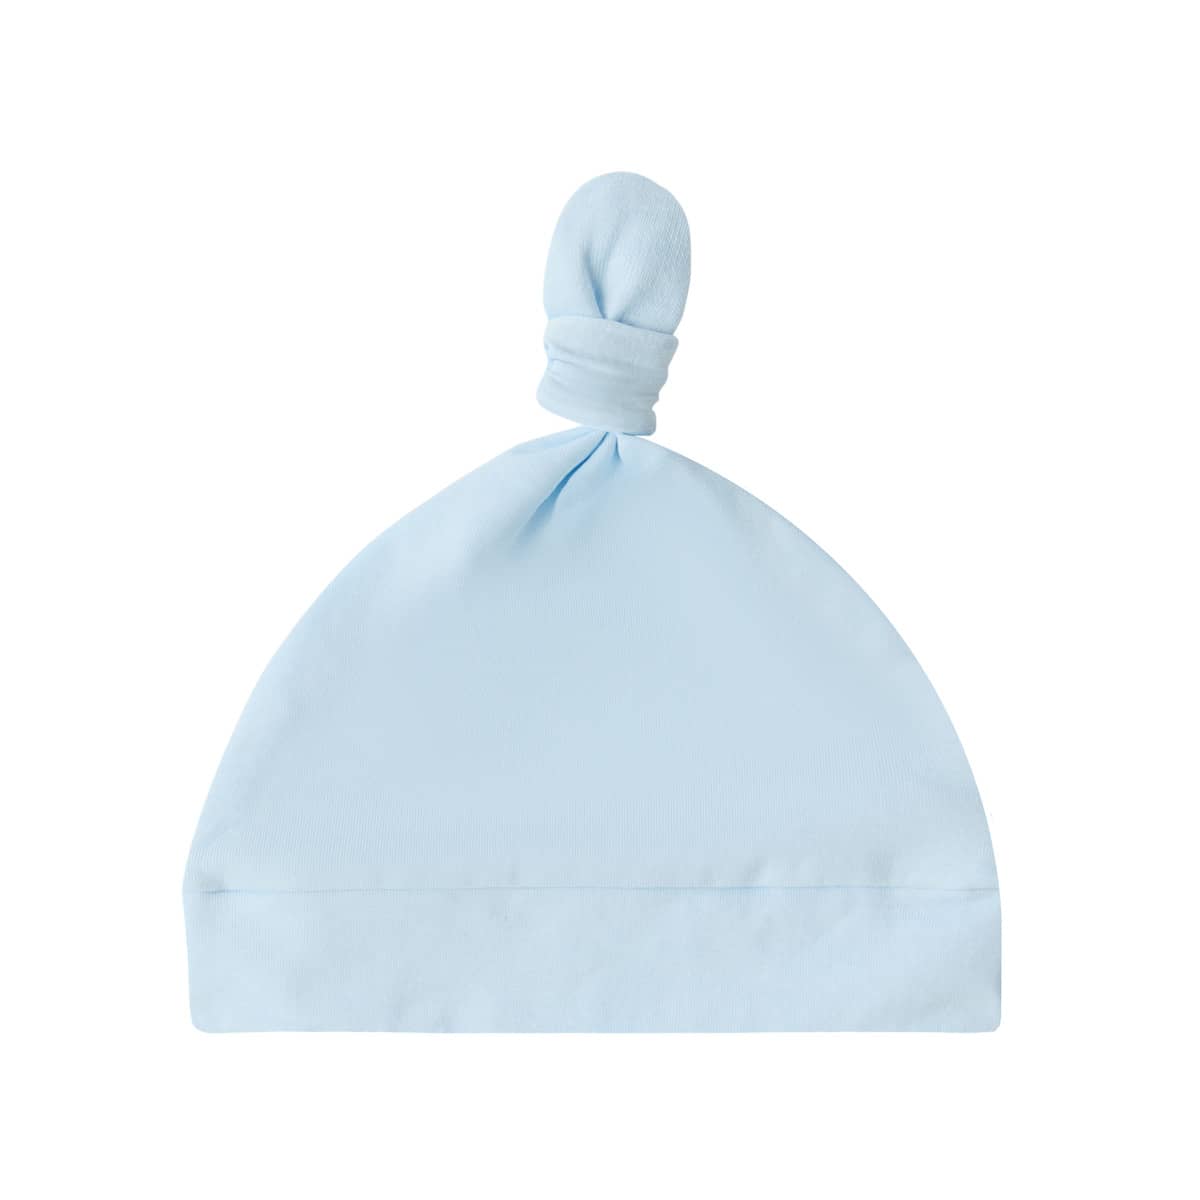 Snuggle Hunny Knotted Beanie - Baby Blue Organic